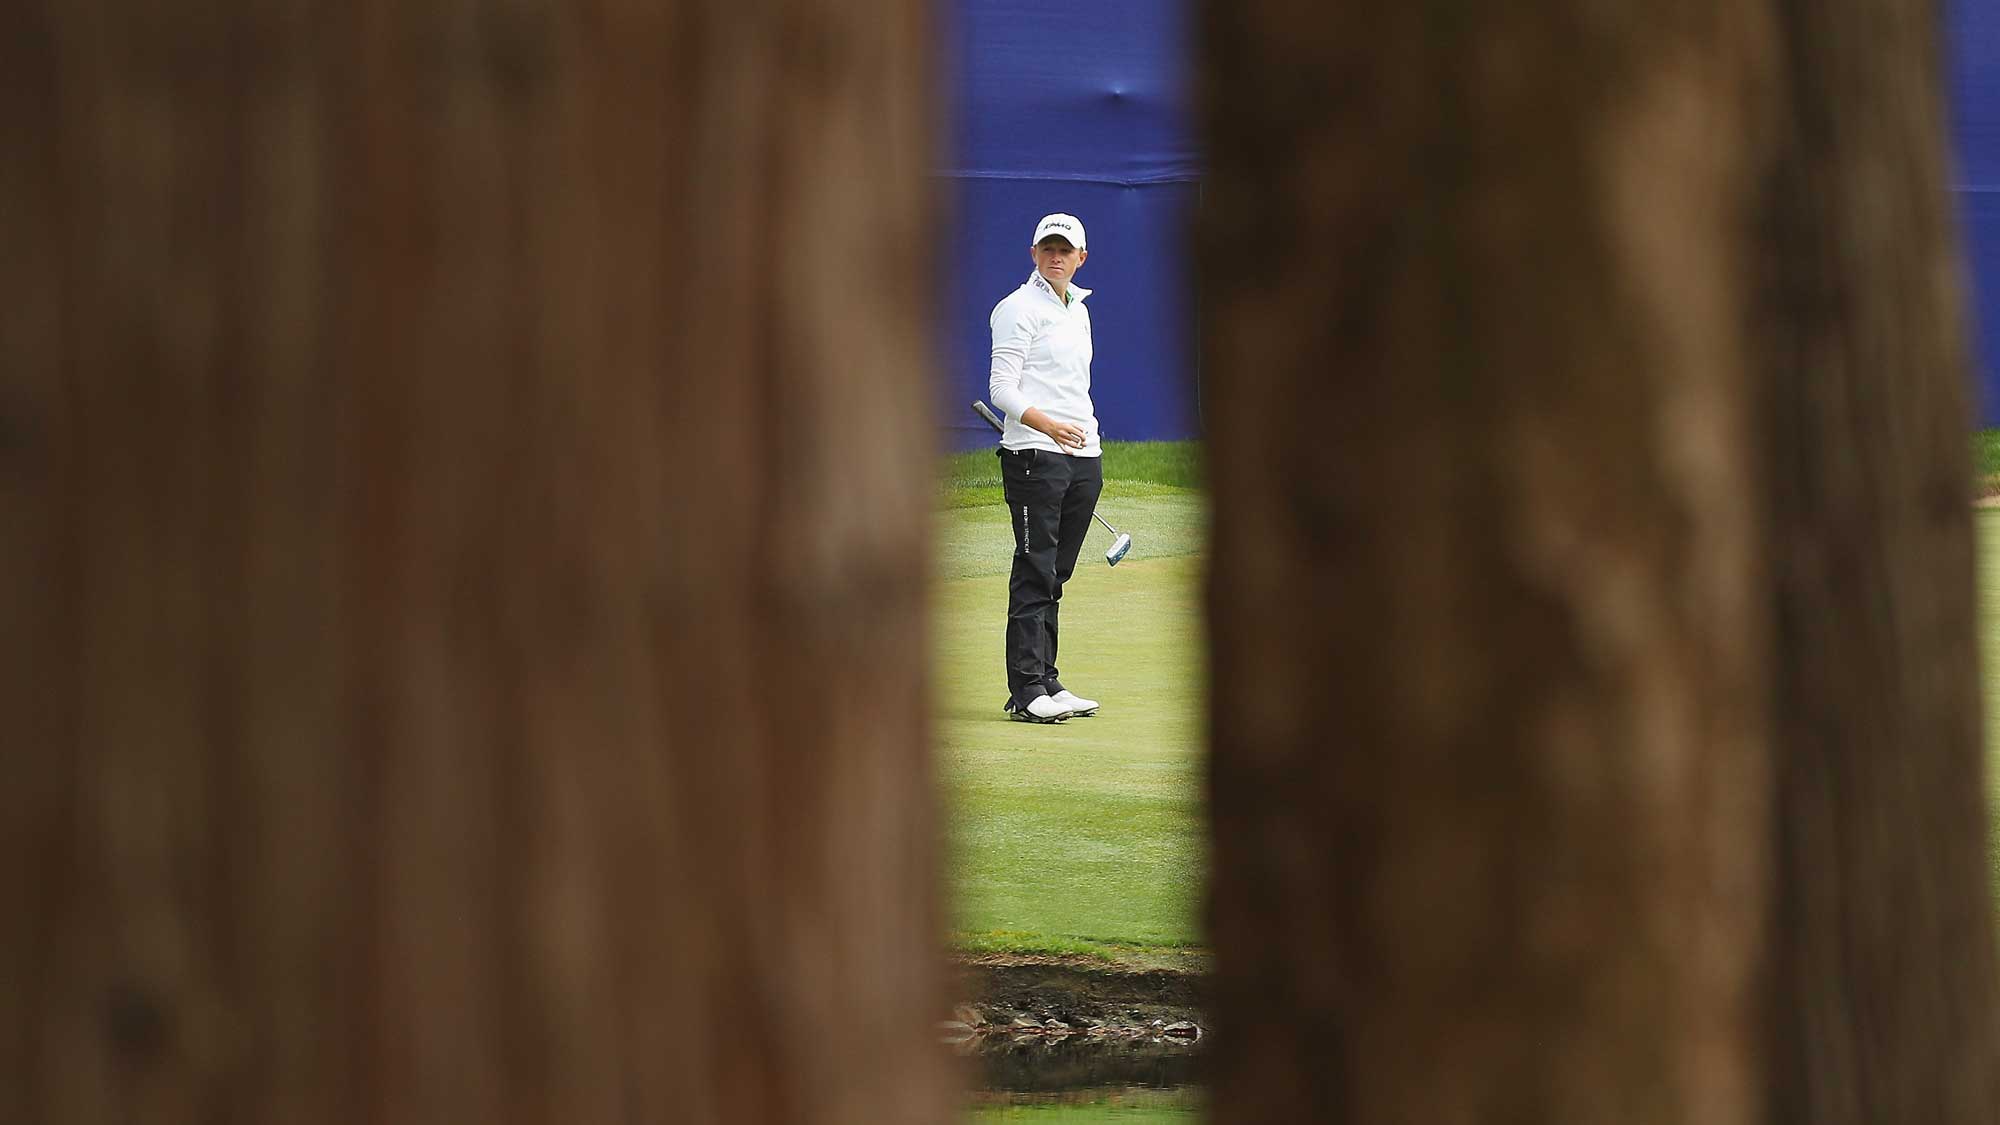 Stacy Lewis waits on the 17th hole during the first round of the KPMG Women's PGA Championship at the Sahalee Country Club